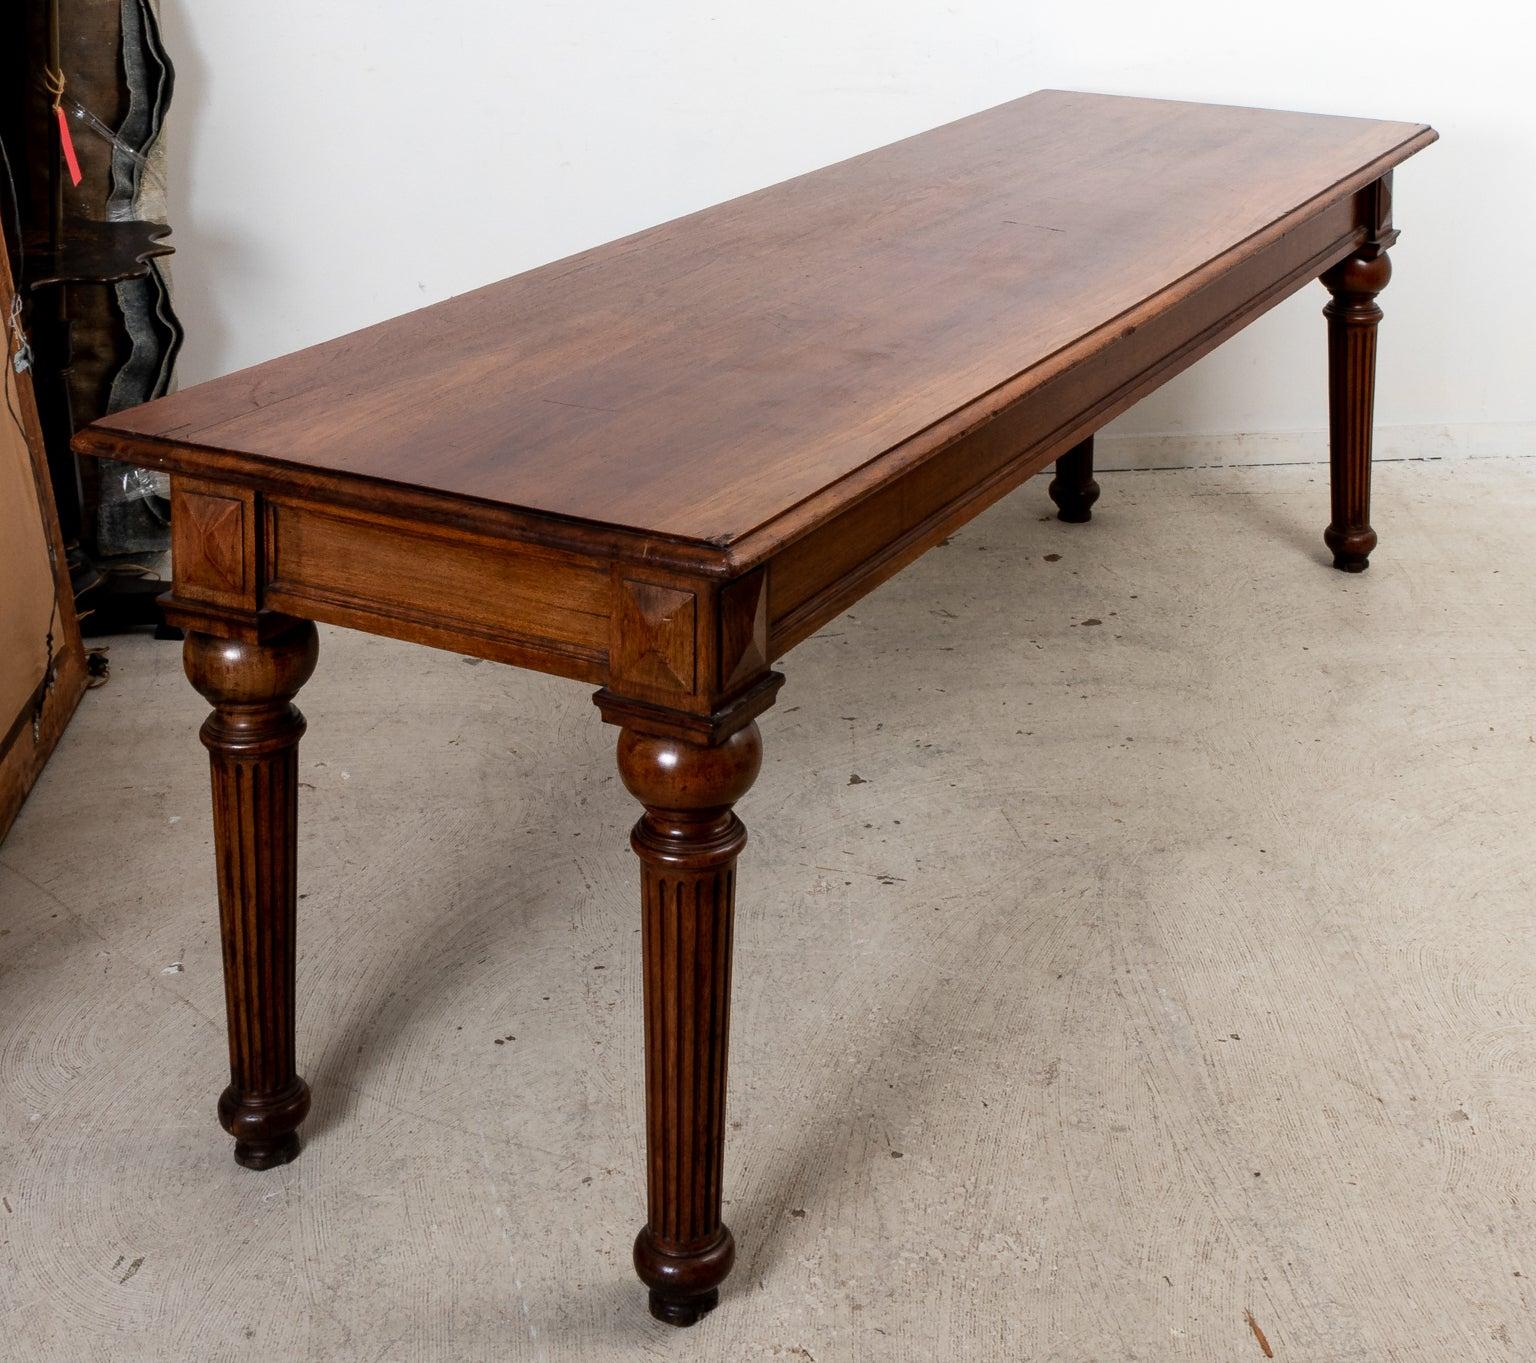 Mahogany Library table with turned fluted legs. Please note of wear consistent with age.